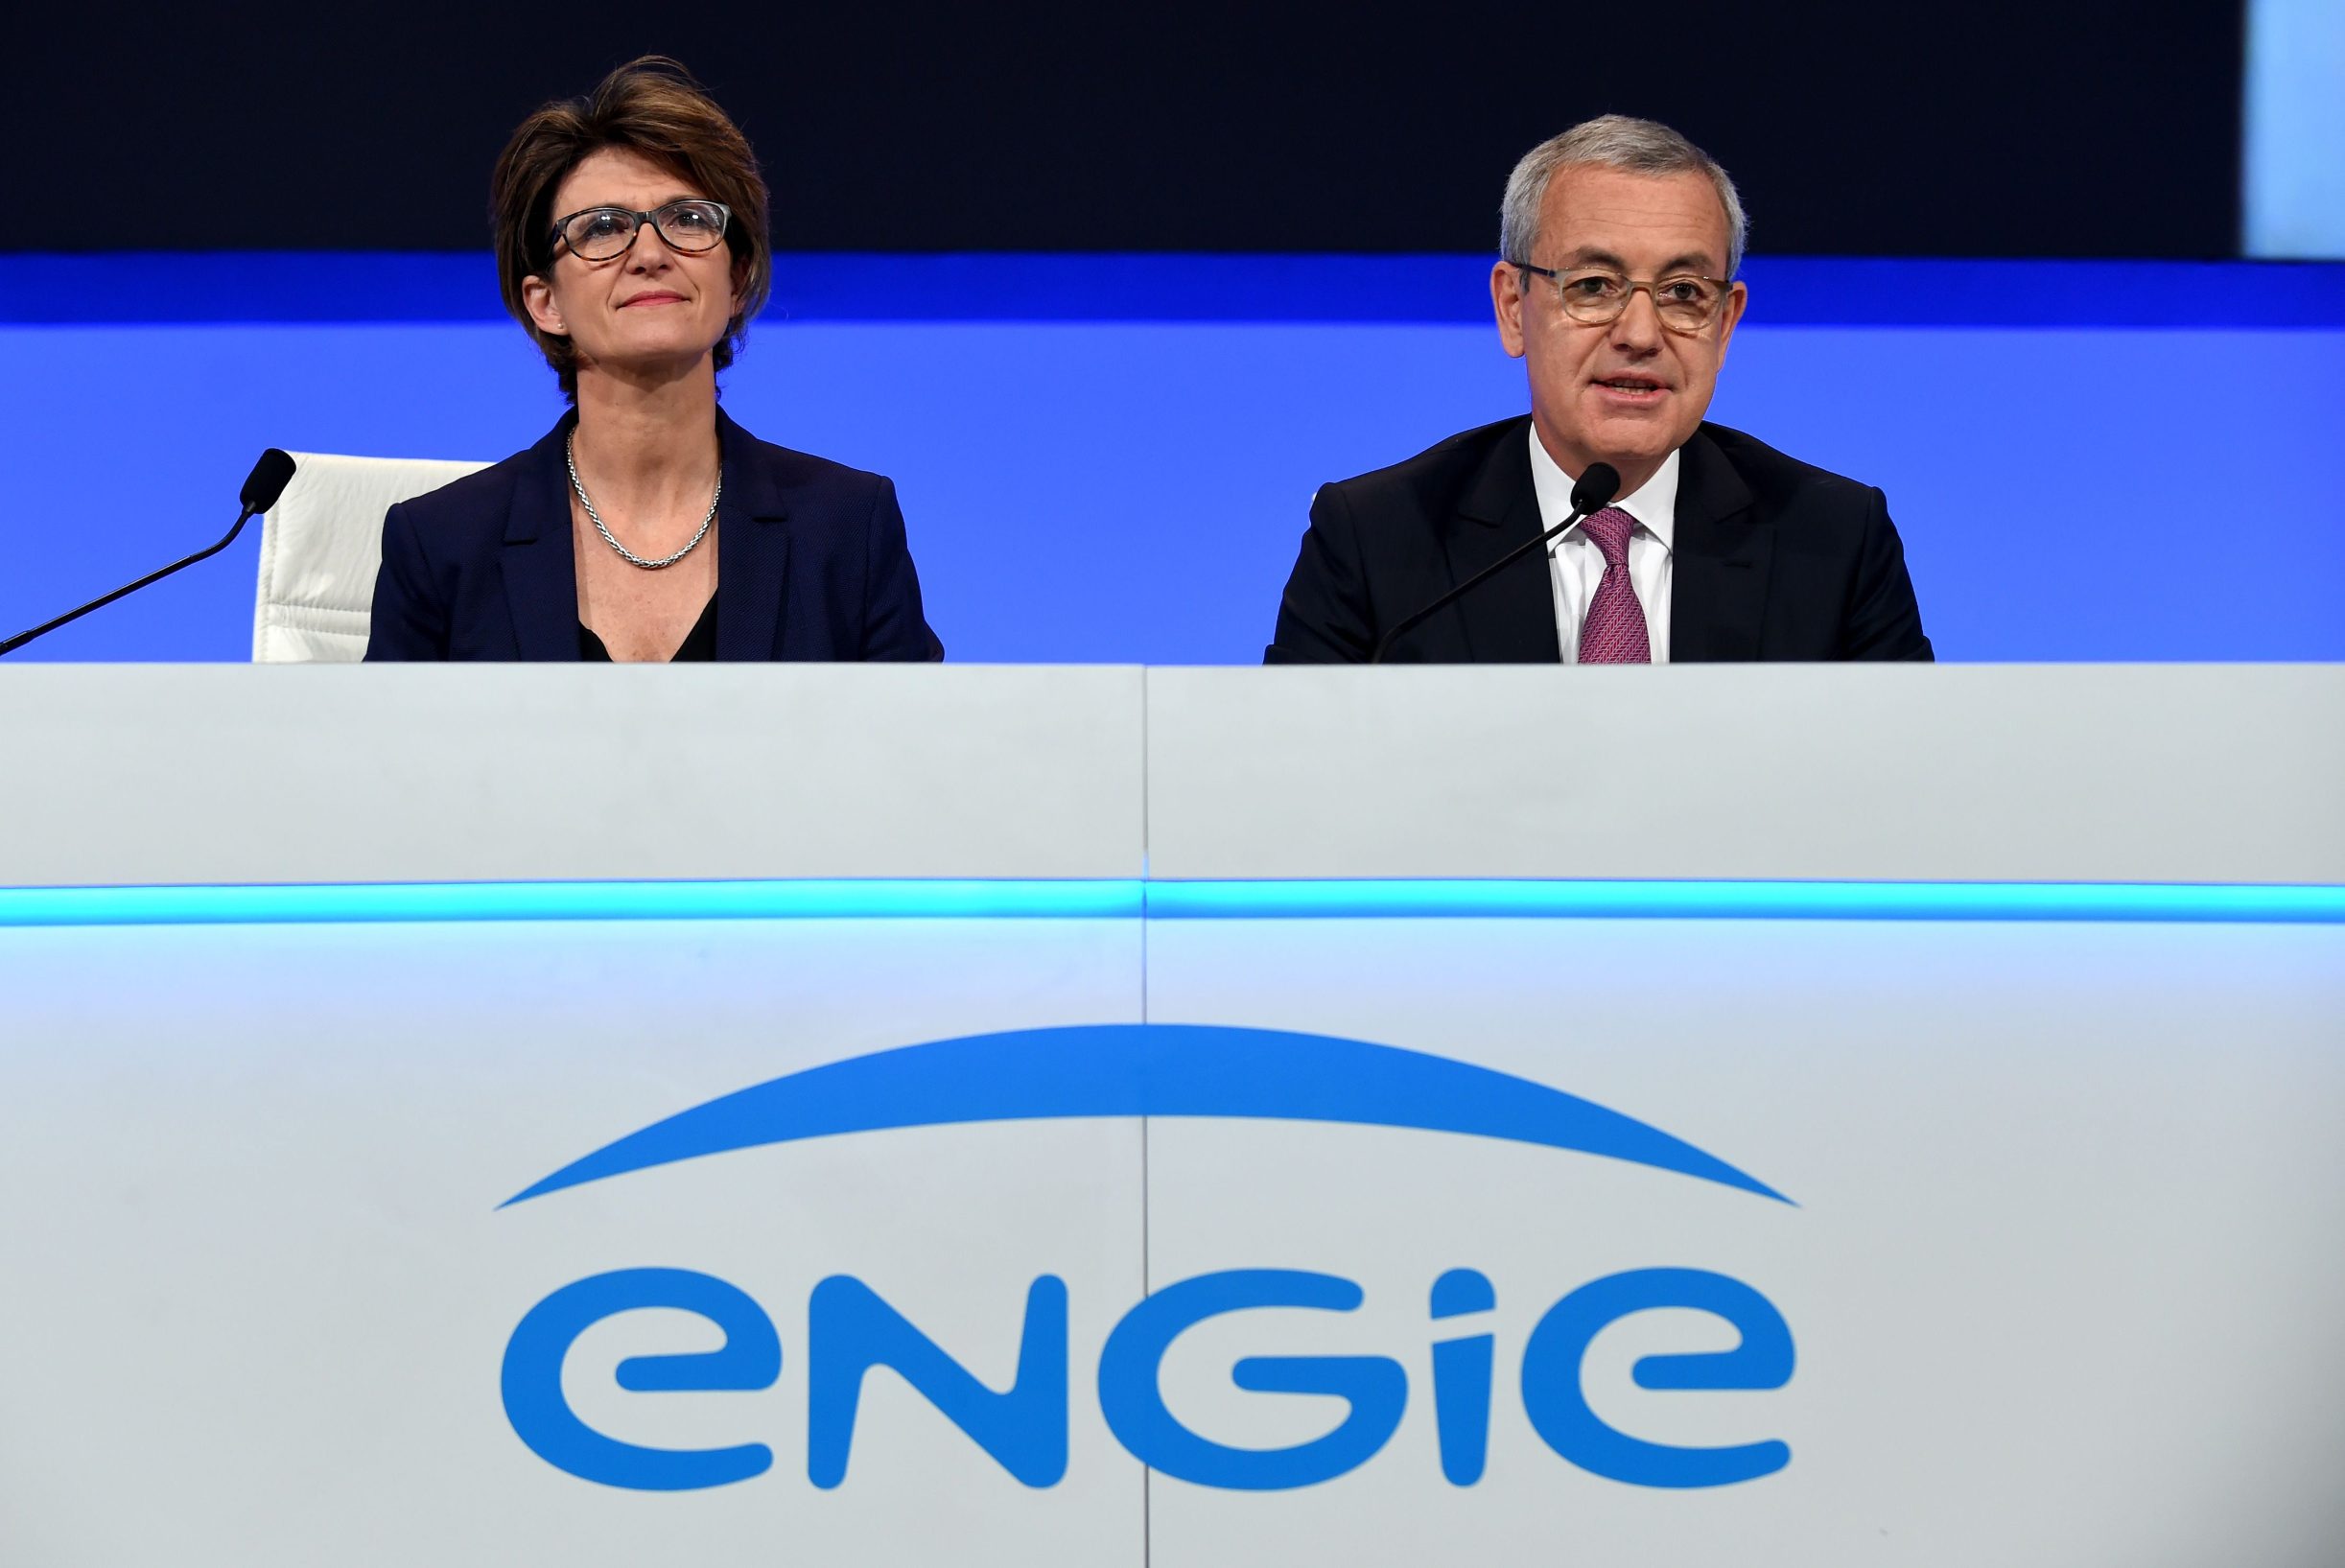 (FILES) In this file photo taken on May 17, 2019, French energy company Engie's chief executive Isabelle Kocher (L) and chairman of the board Jean-Pierre Clamadieu attend the group's general meeting in Paris. - The decision whether or not to renew Isabelle Kocher as managing director of Engie to carry out 